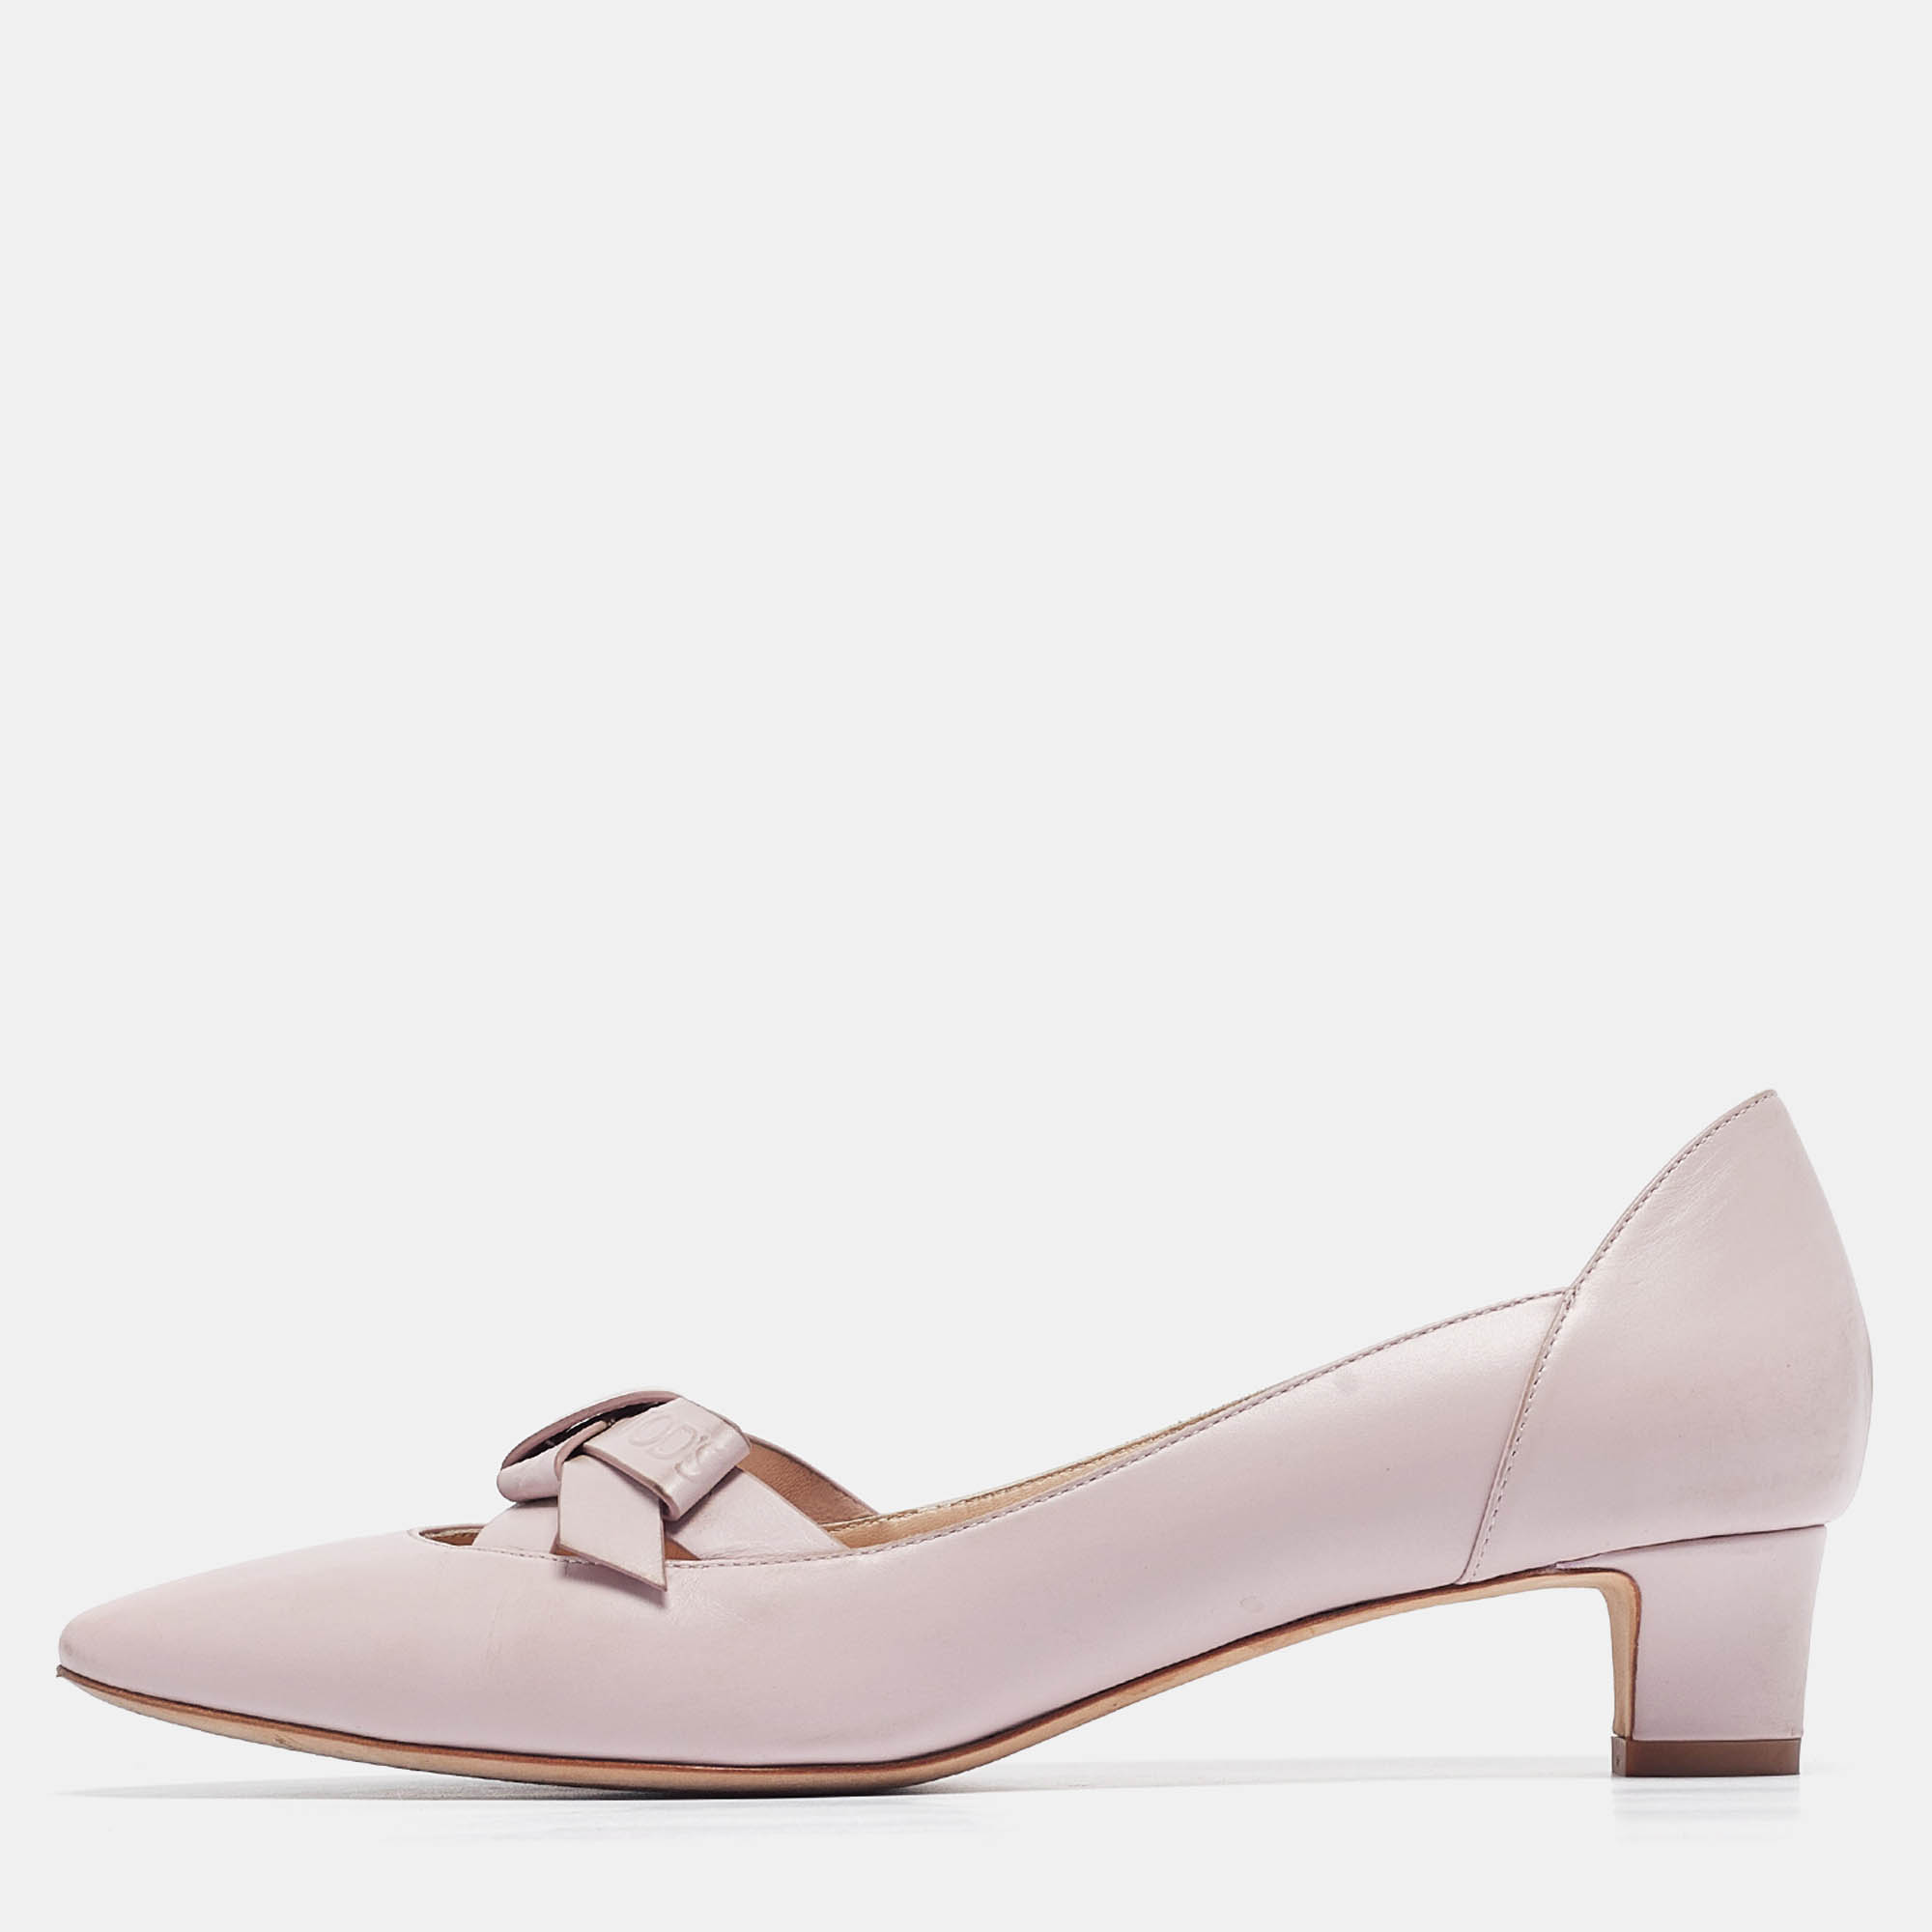 Tod's pink leather bow block heel pumps size 37.5